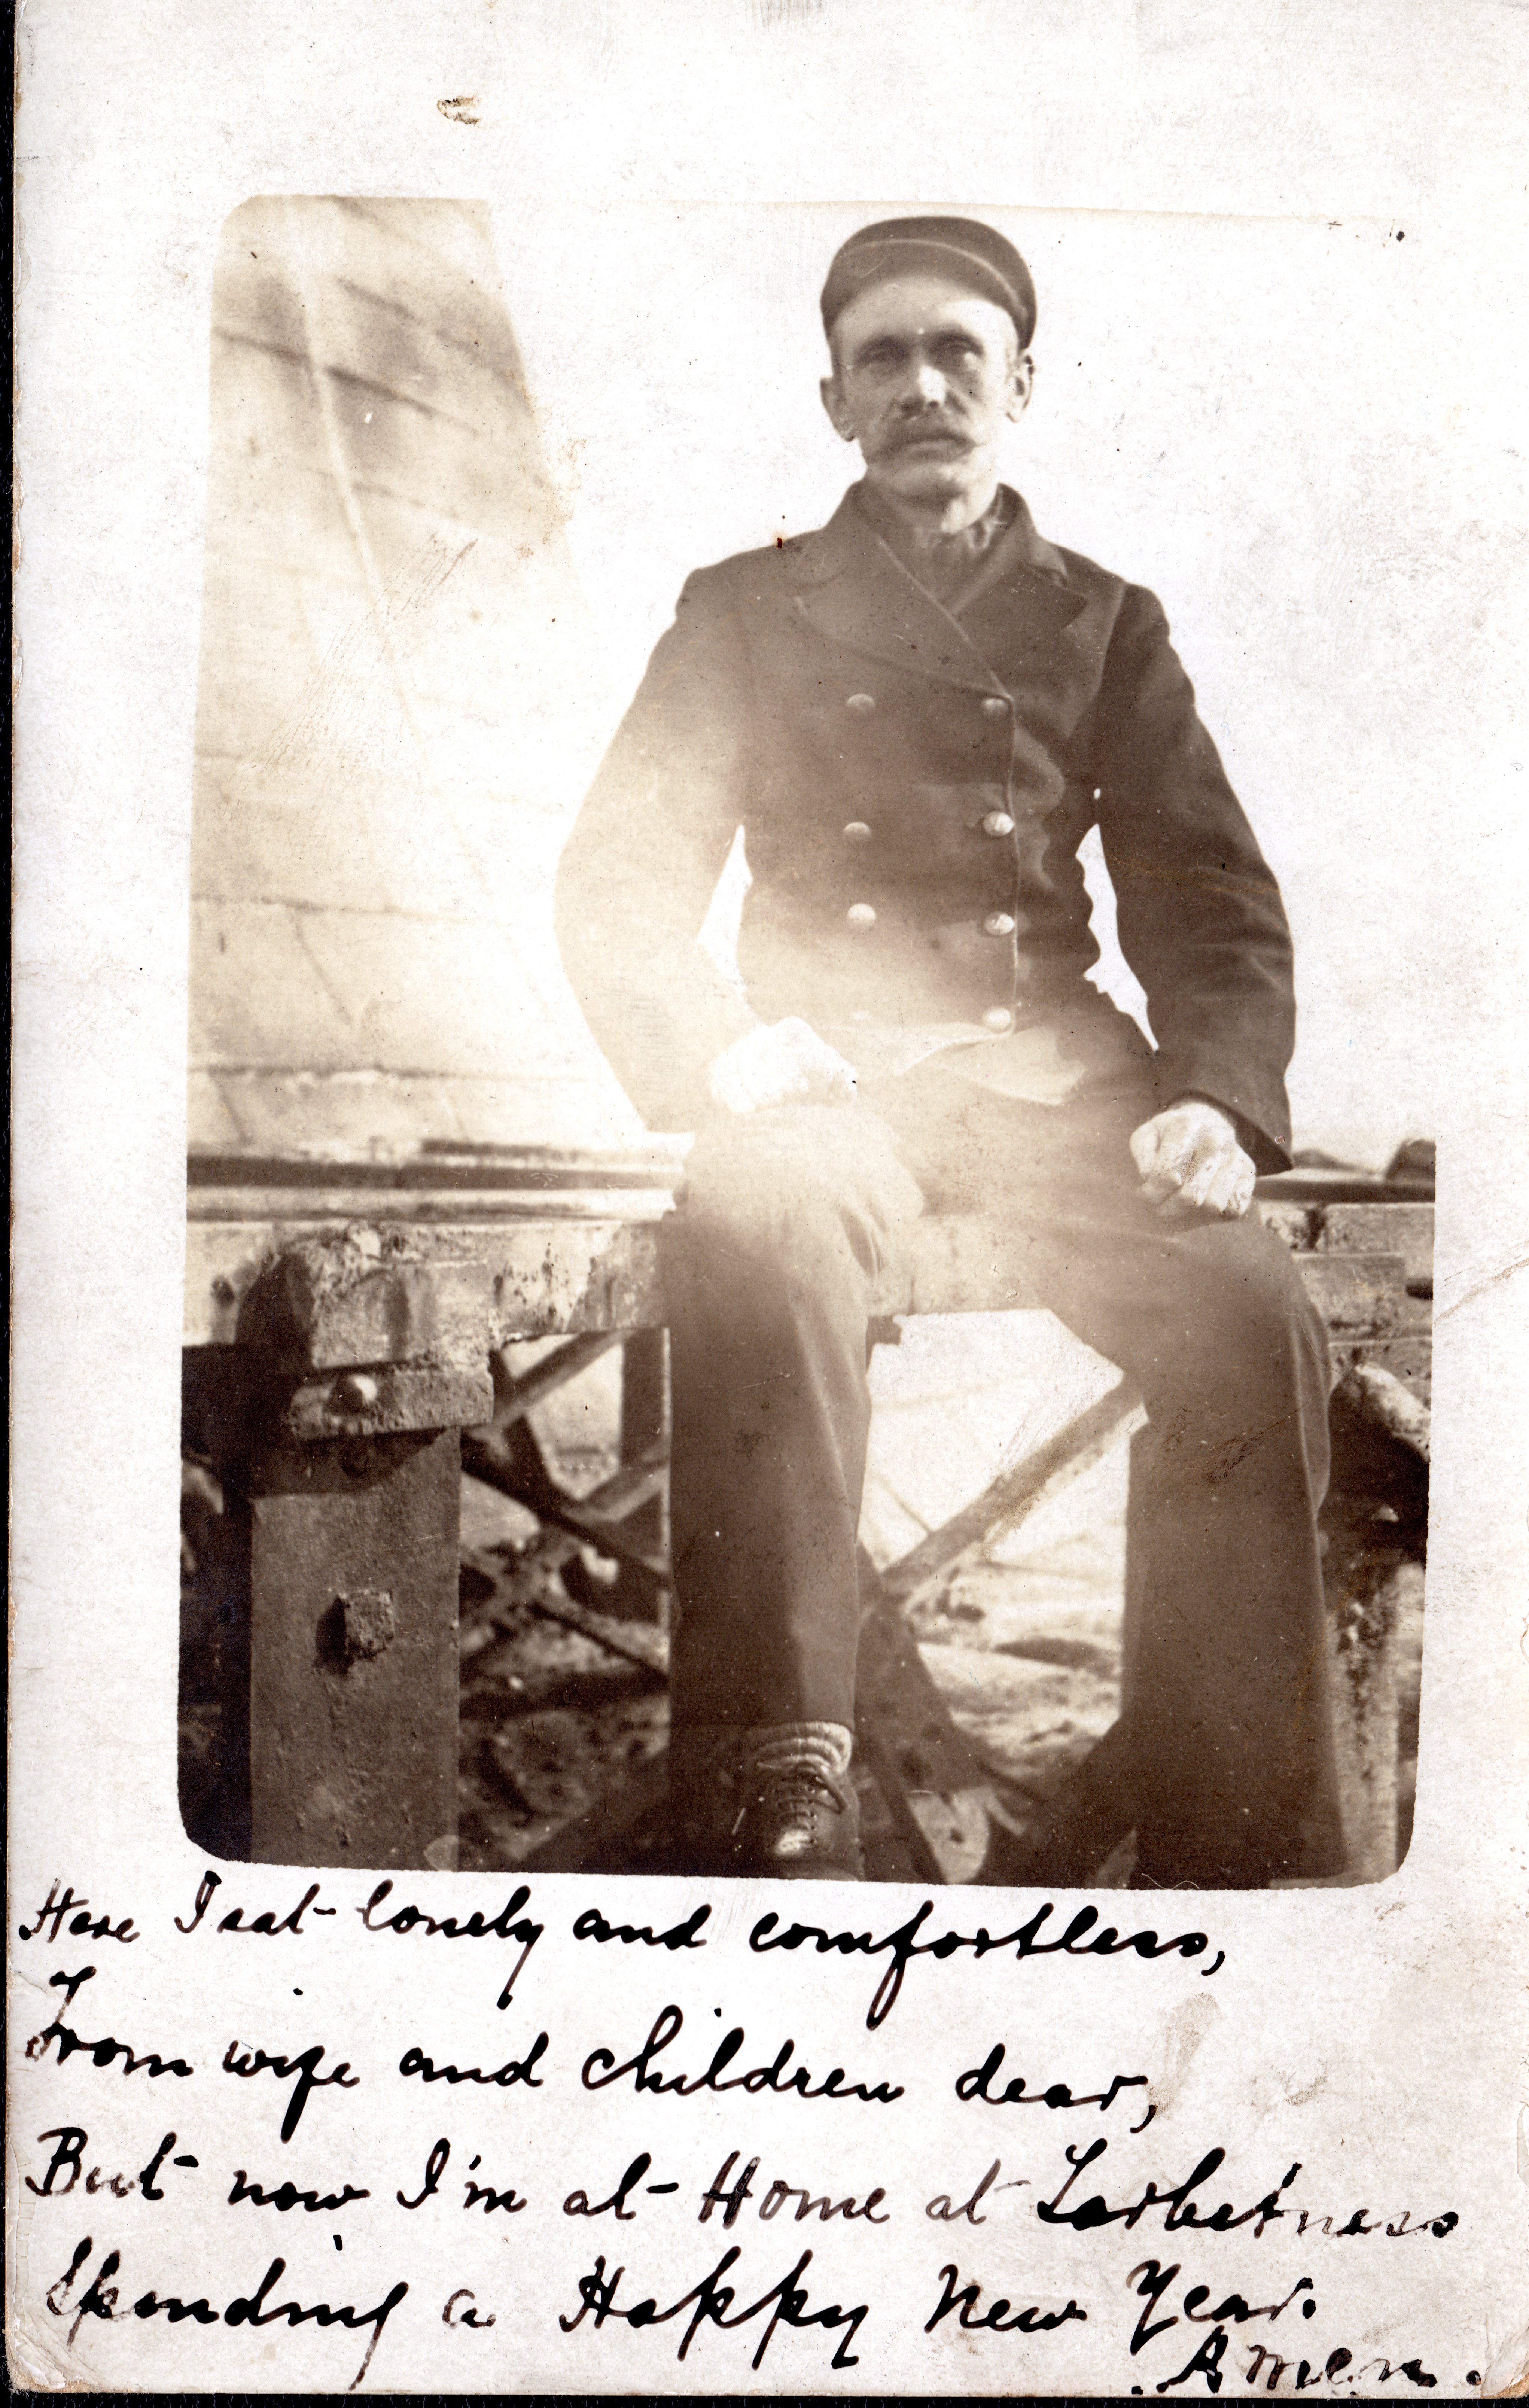 Photograph of lightkeeper, believed to be John Brown Henderson, sitting outside. There is a handwritten poem underneath.